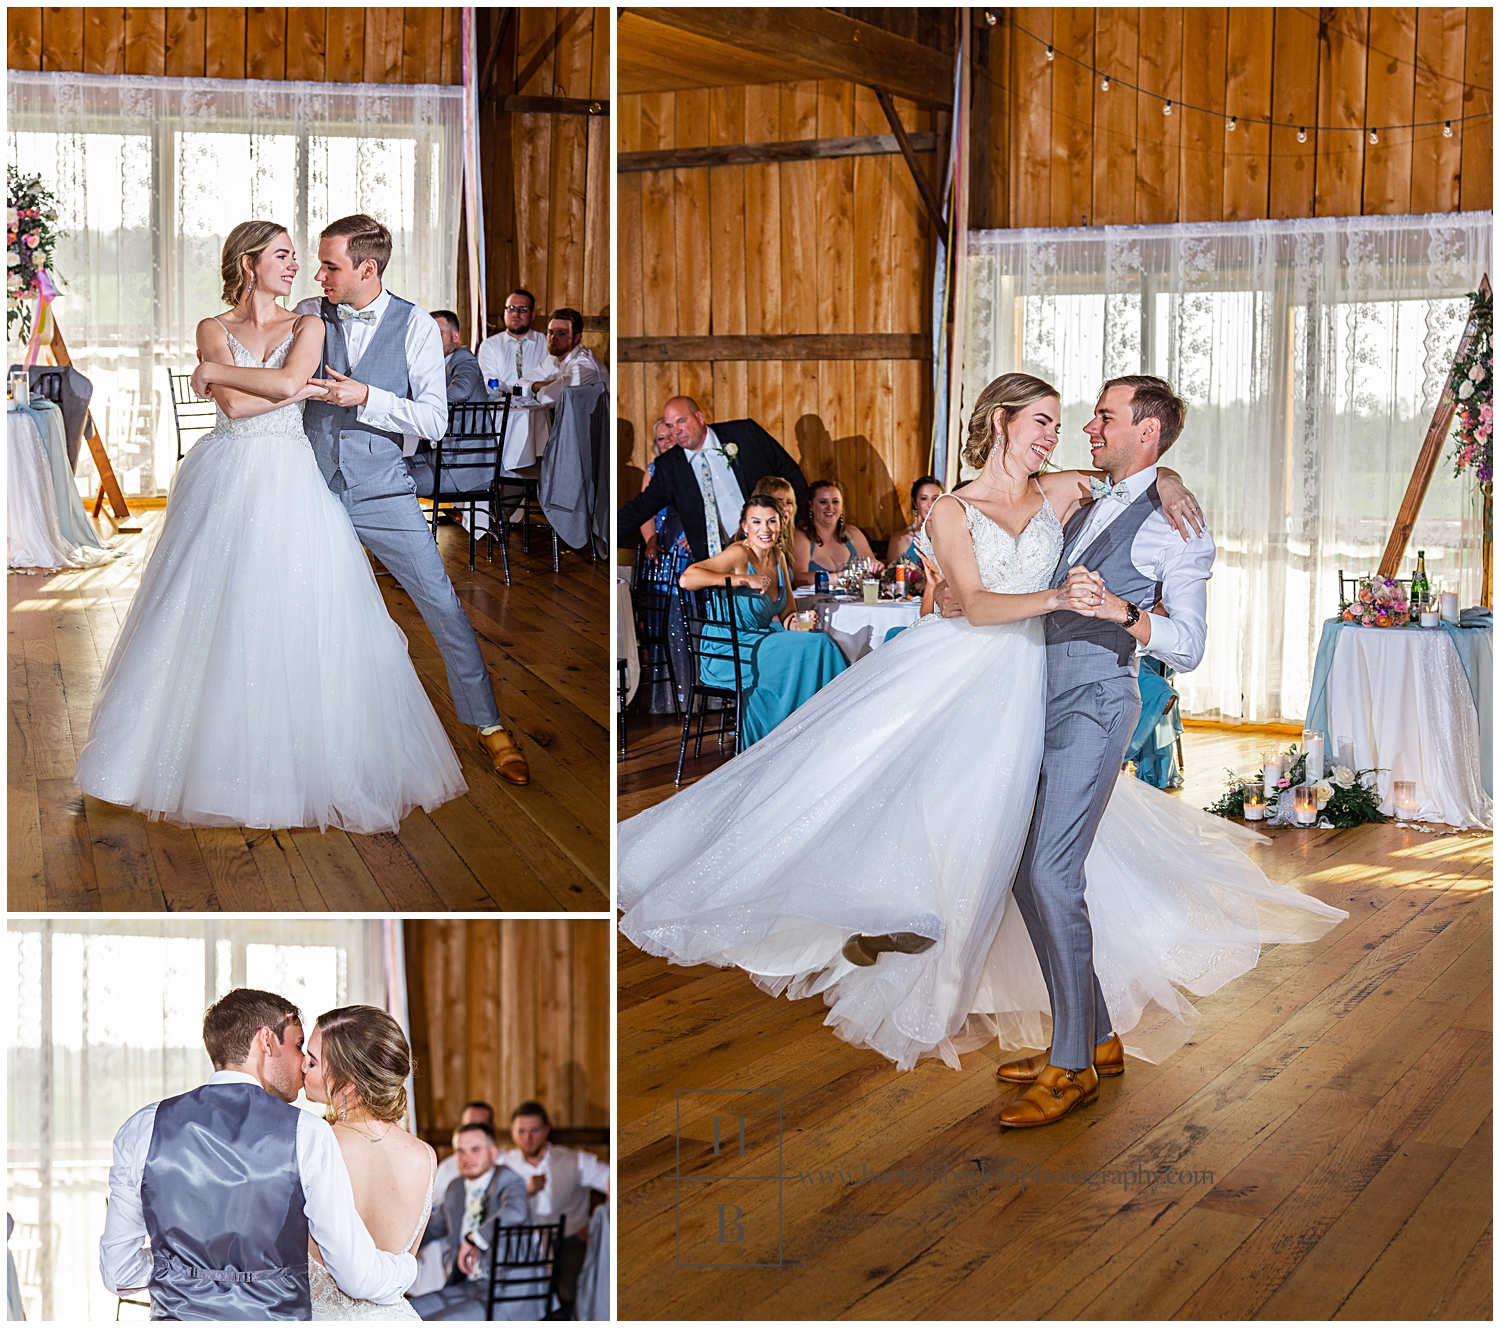 Wedding couple does a choreographed first dance.